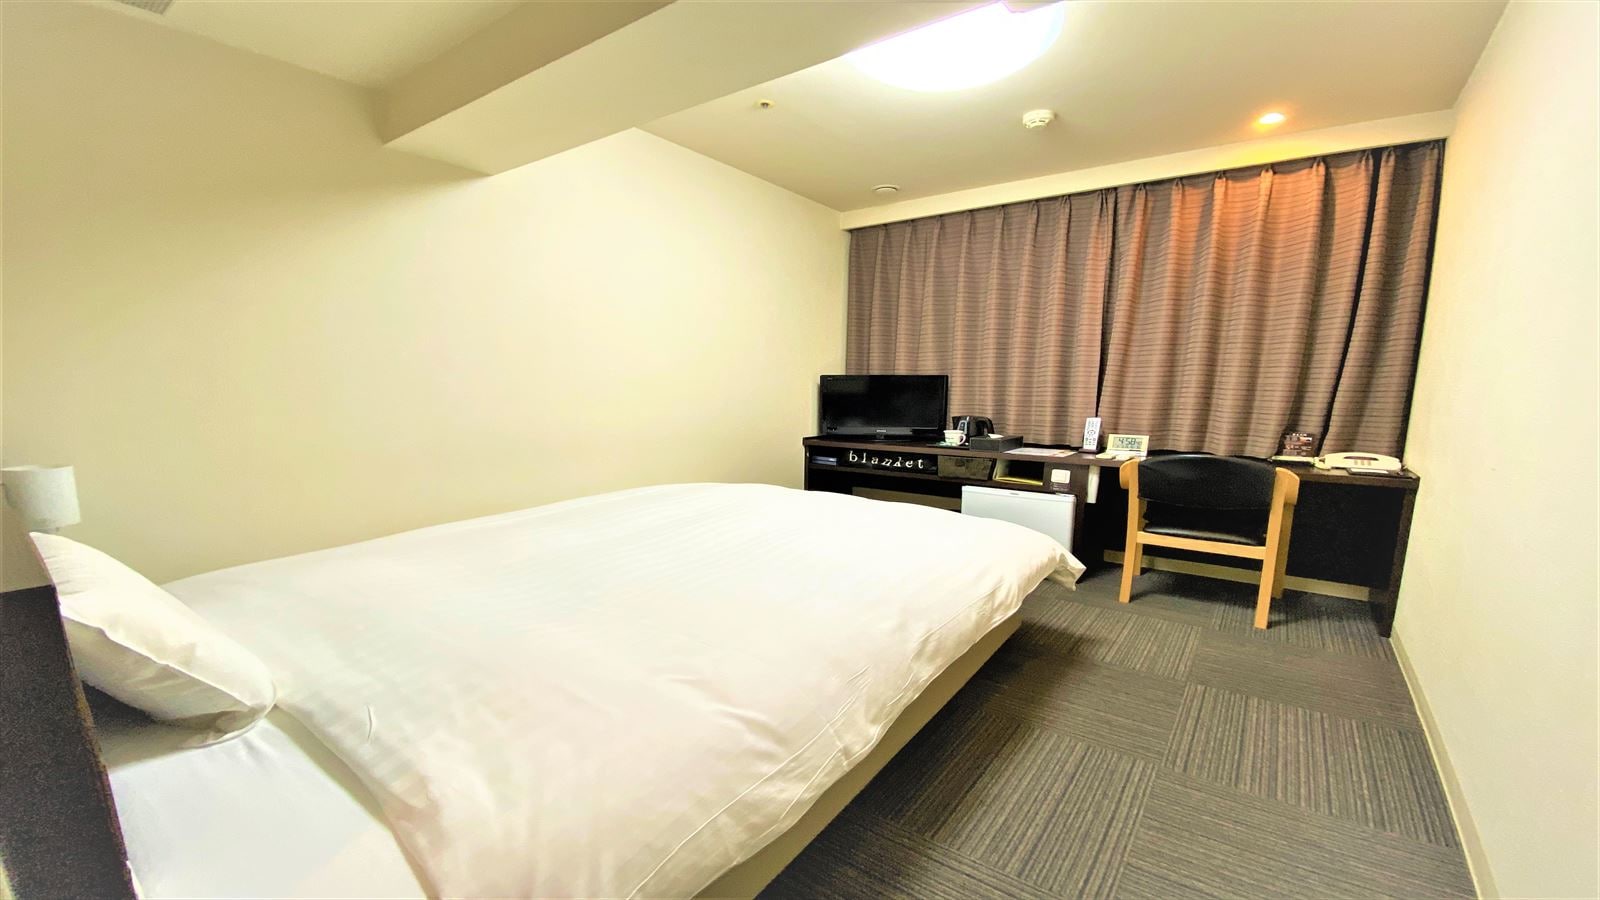 ◆ Non-smoking economy single room 12 square meters bed size 140 cm & times; 195 cm 1 unit